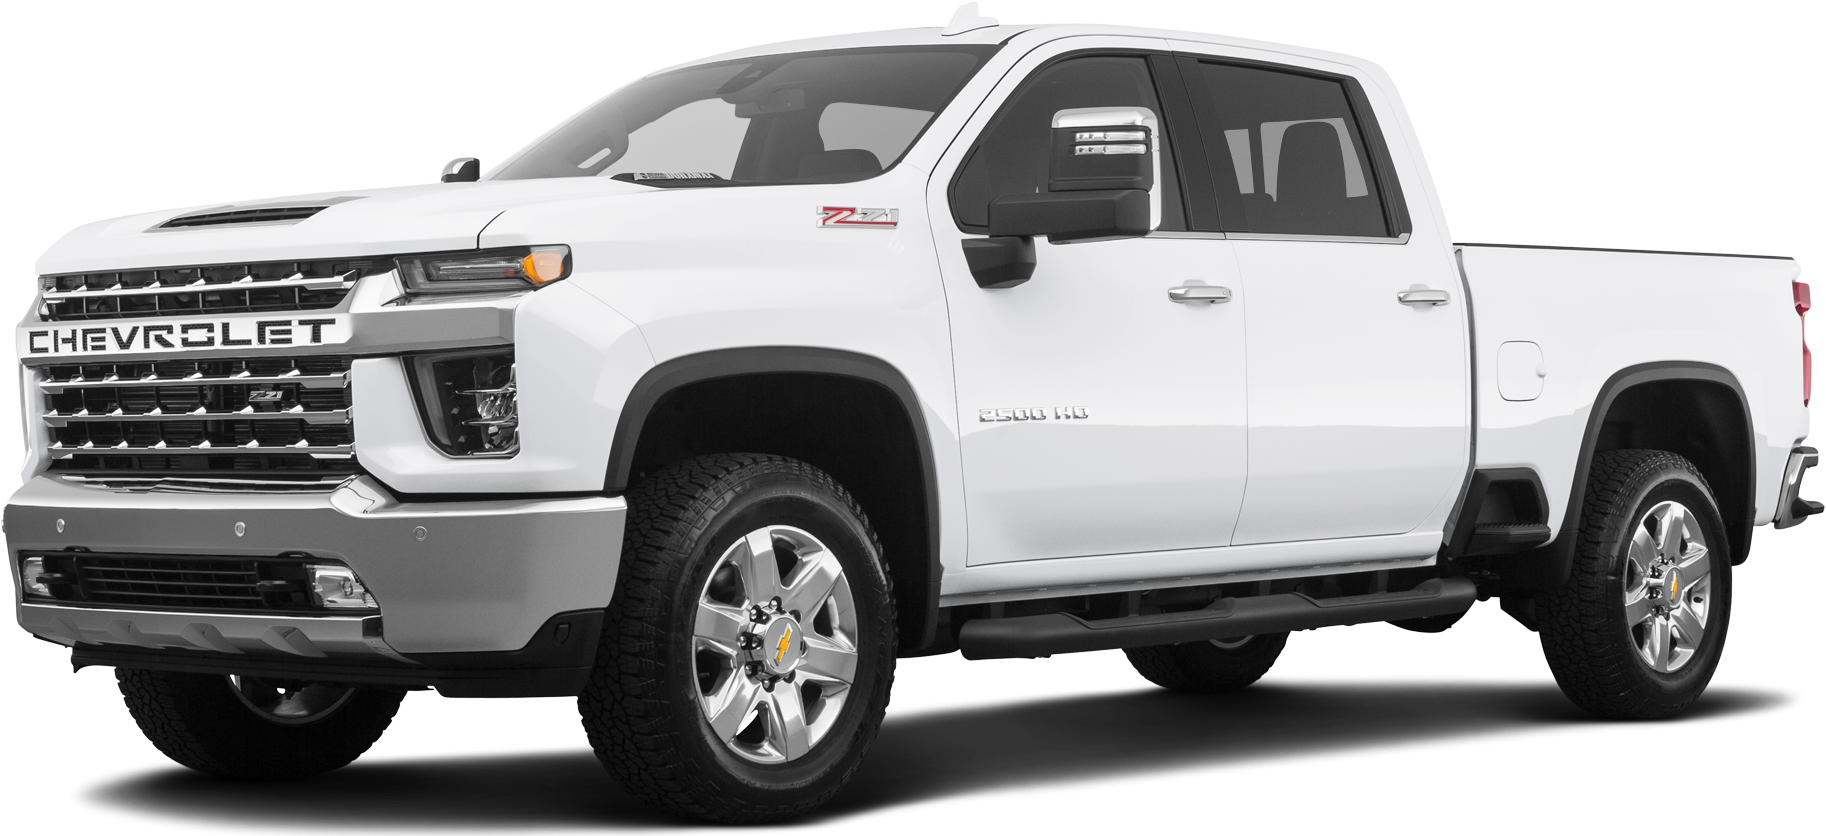 2023 Chevy Silverado 2500 Hd Crew Cab Price Reviews Pictures And More